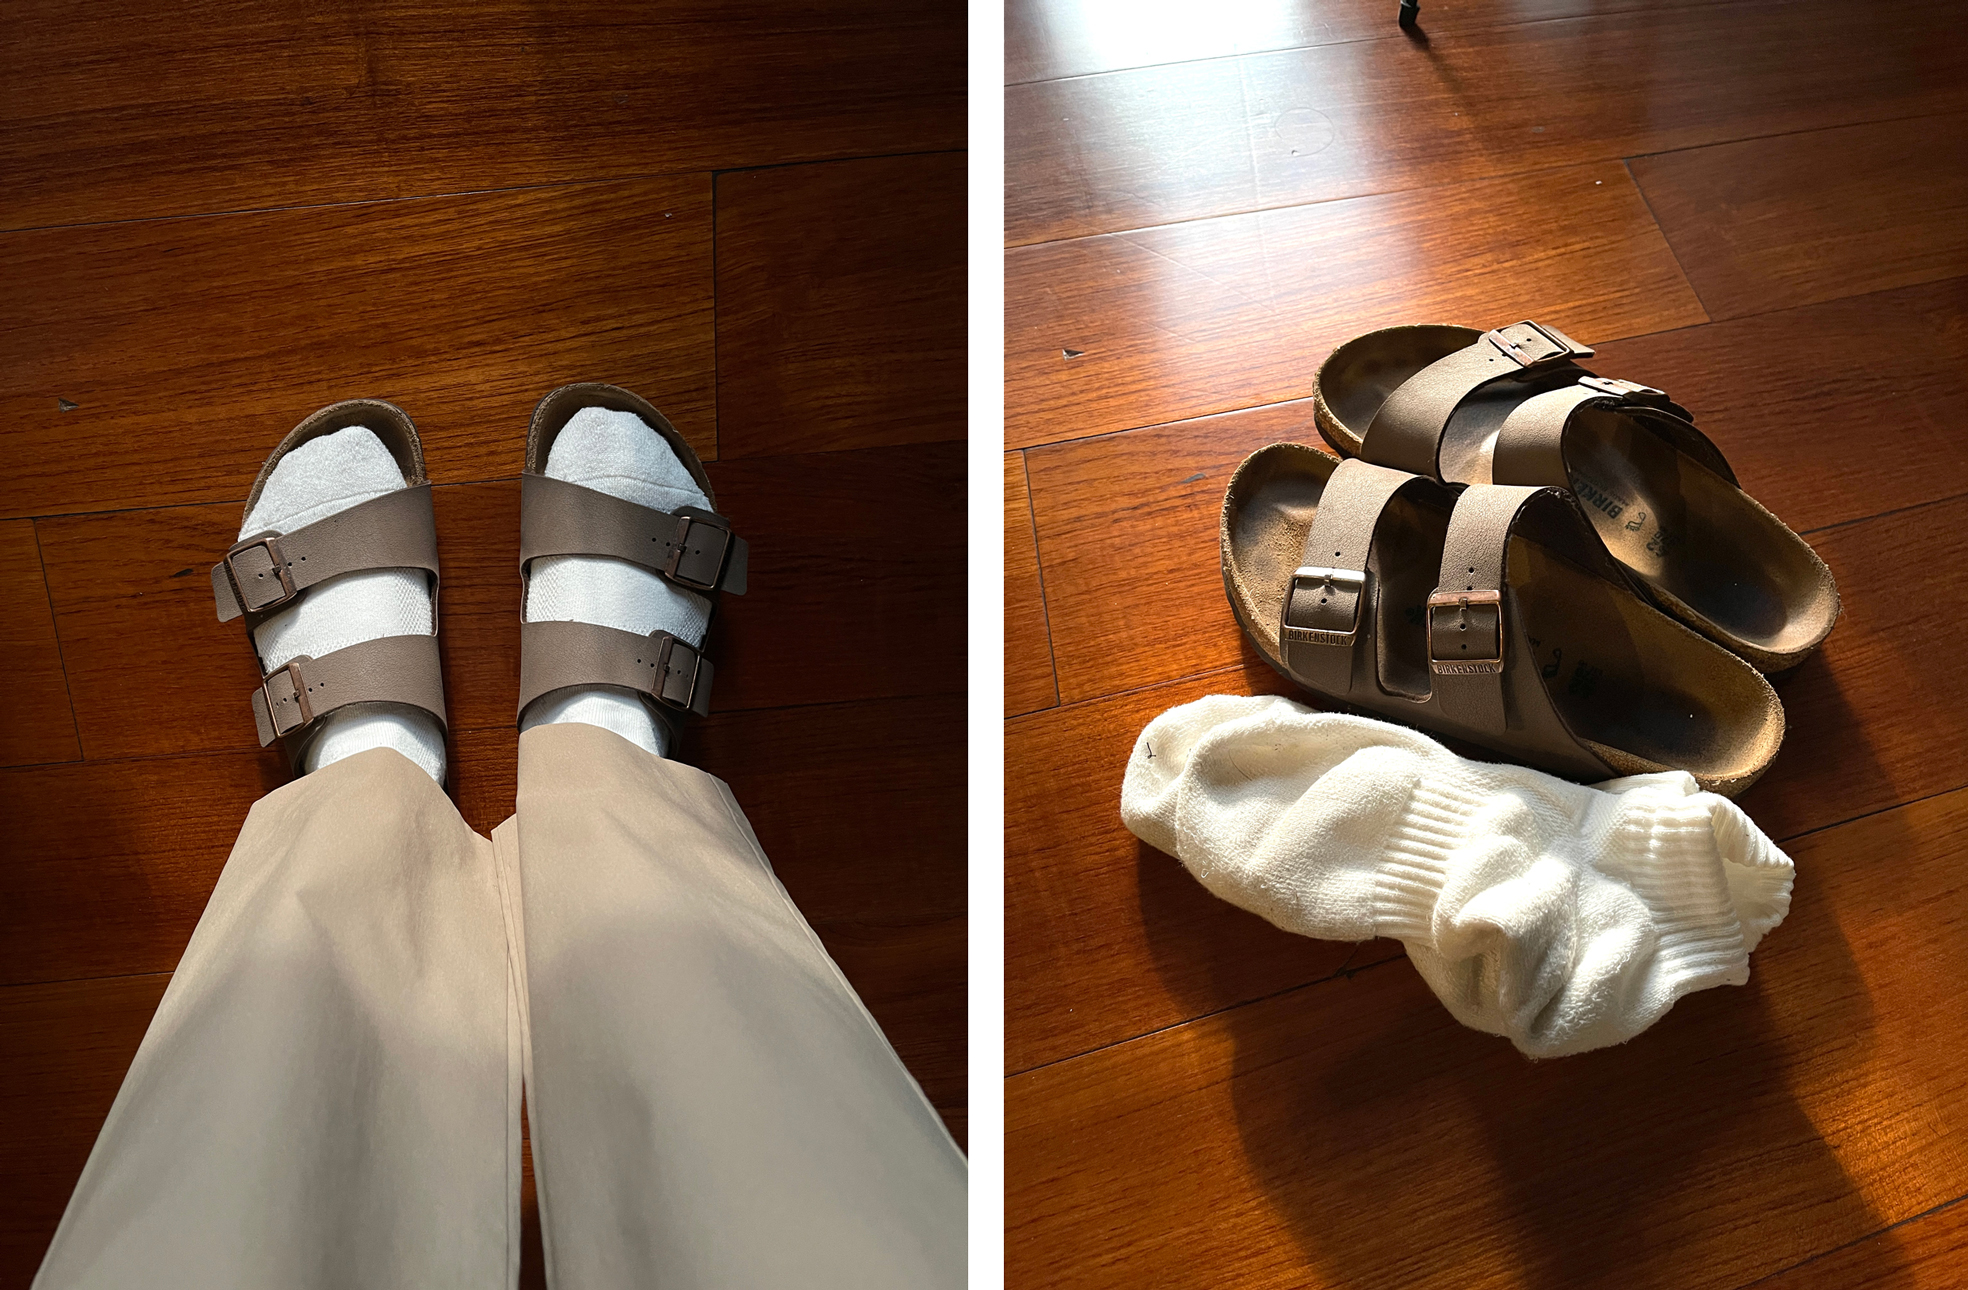 This photo shows a collage of two photos showing the author's socks and sandals.